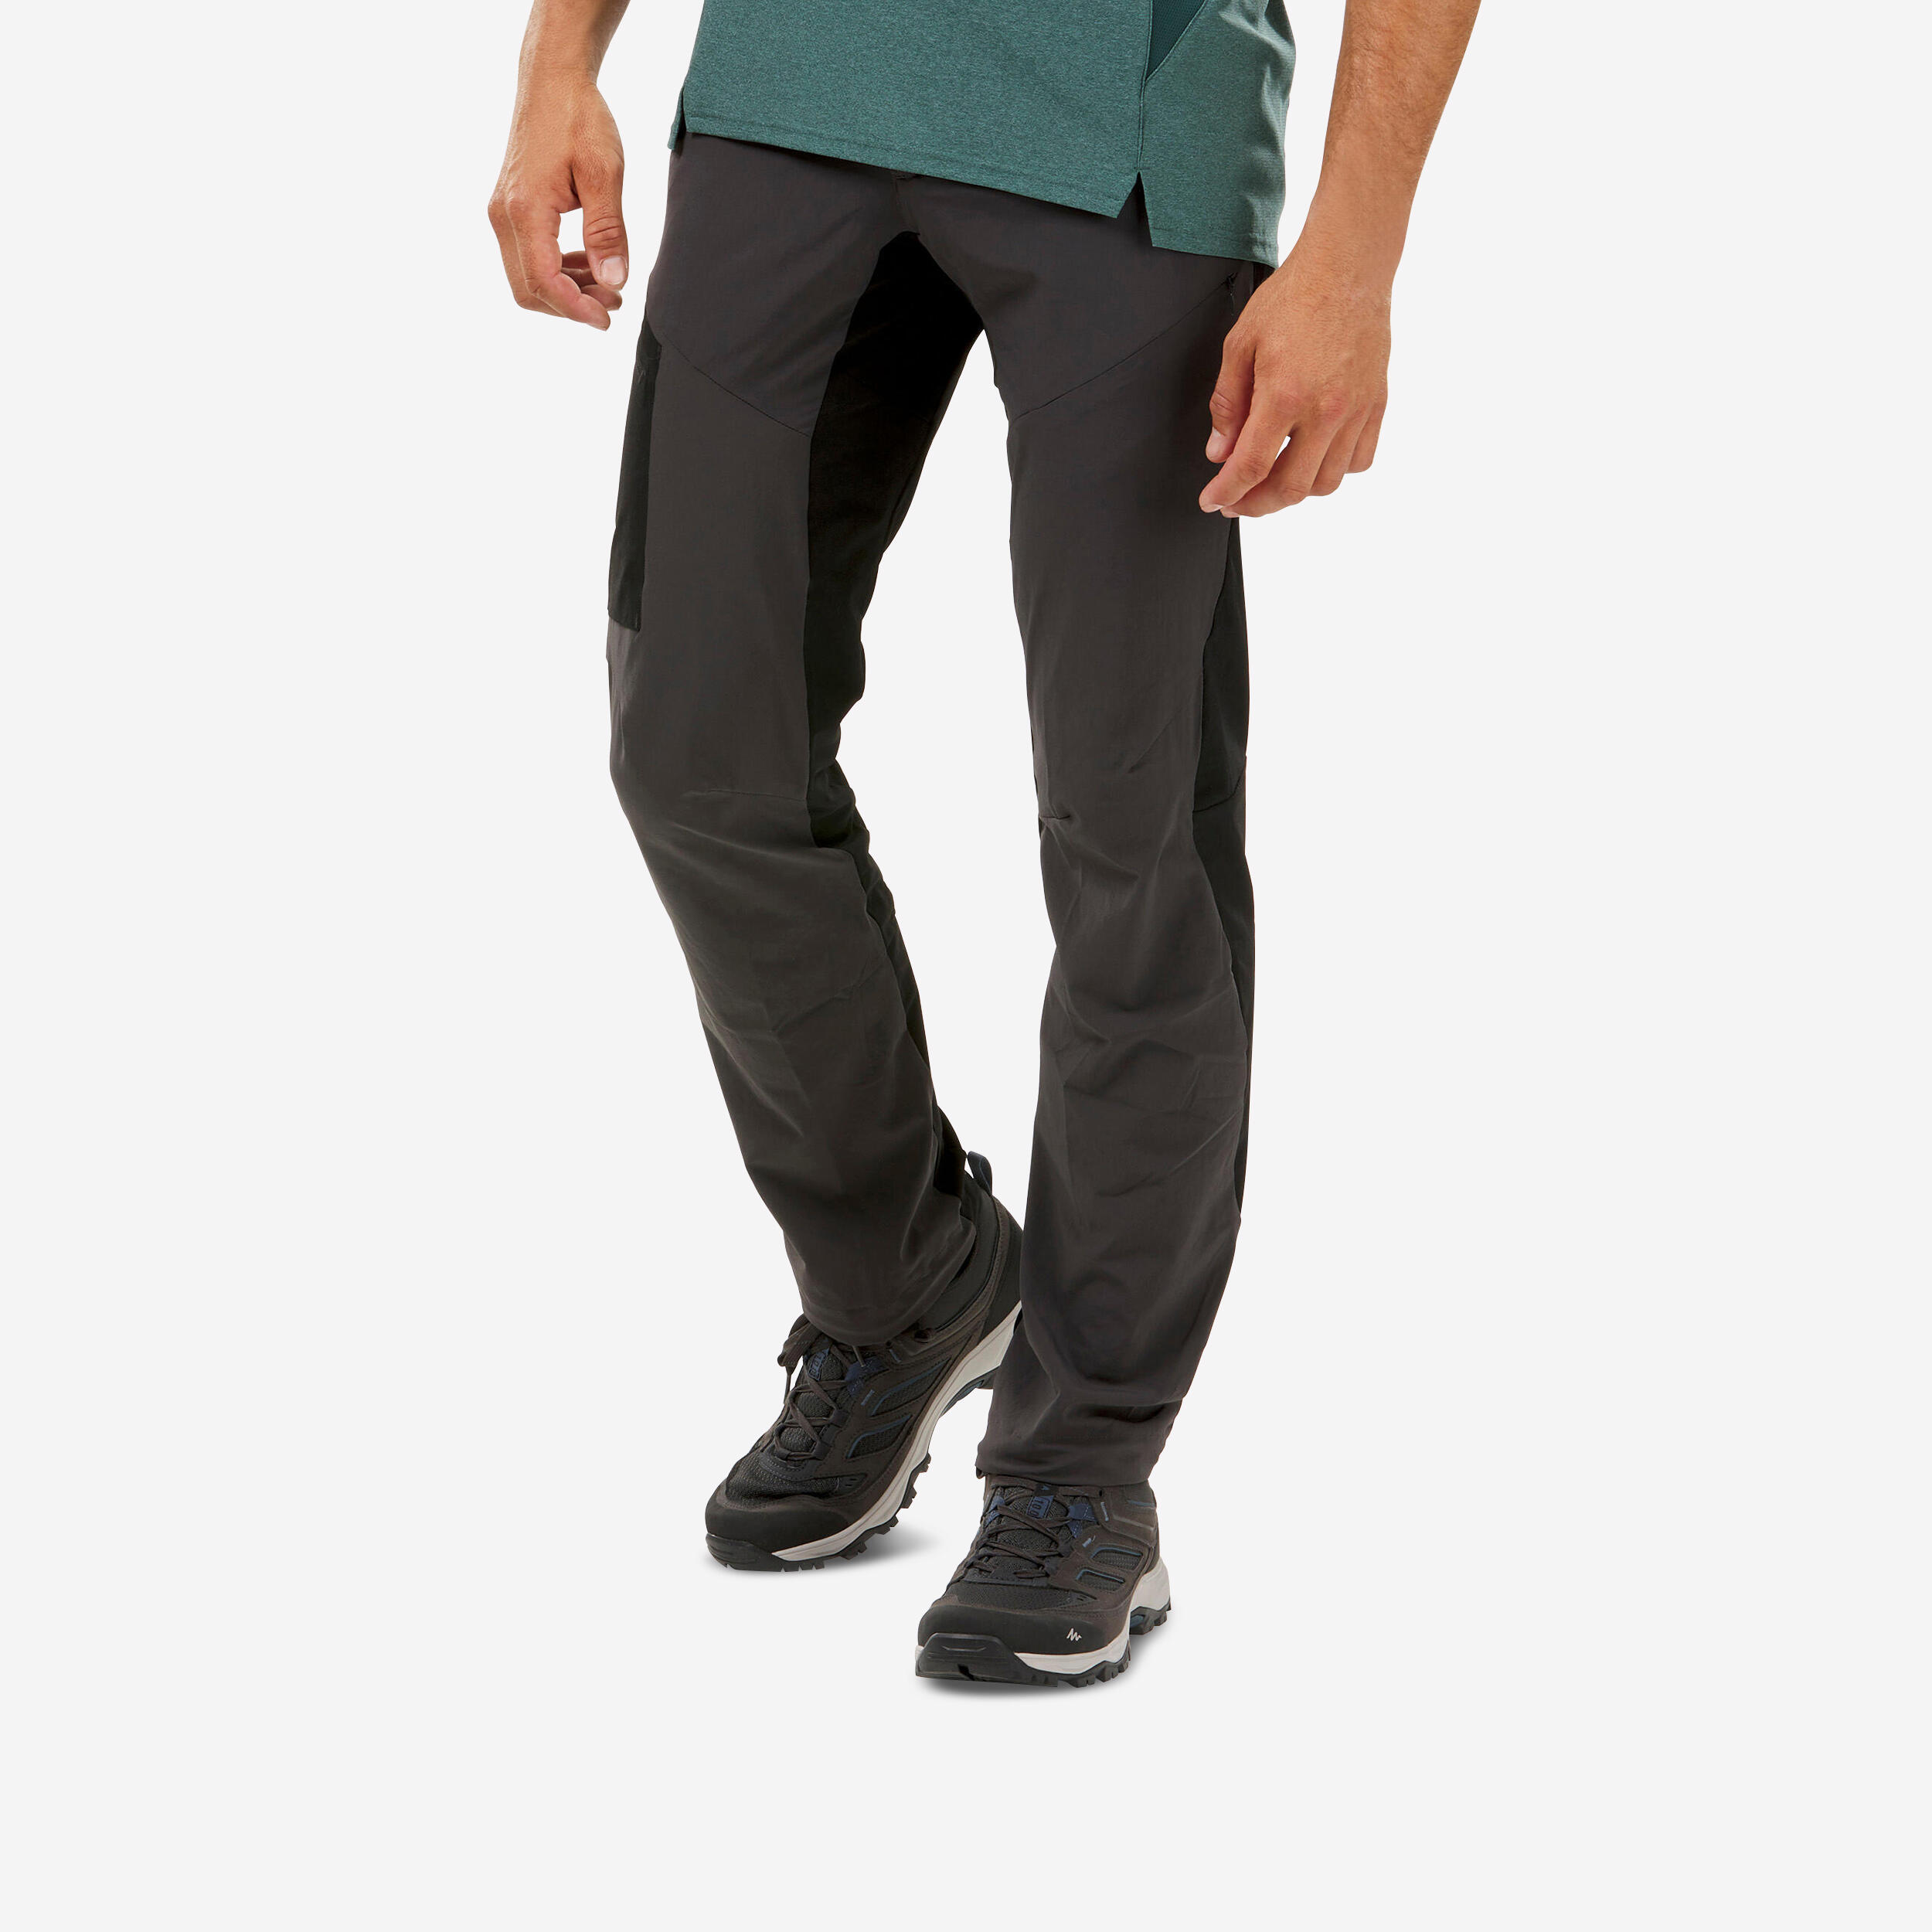 Men's Hiking Trousers MH500 1/13